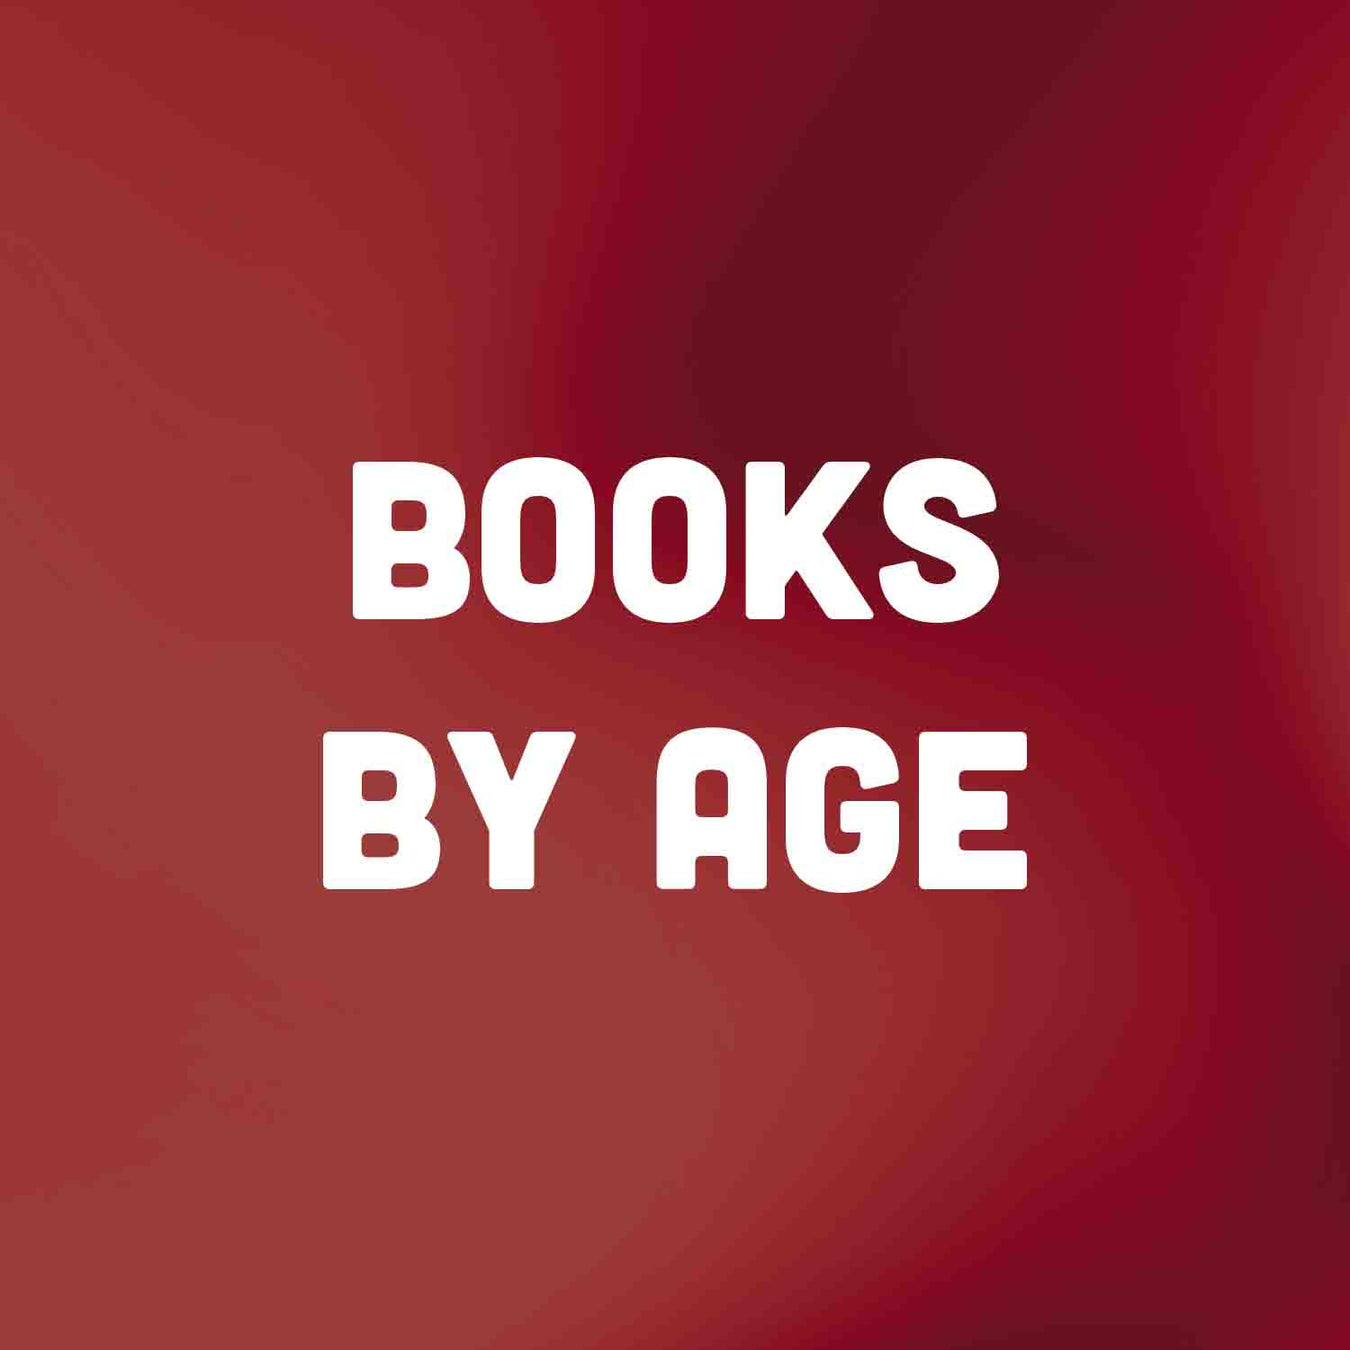 Books by Age